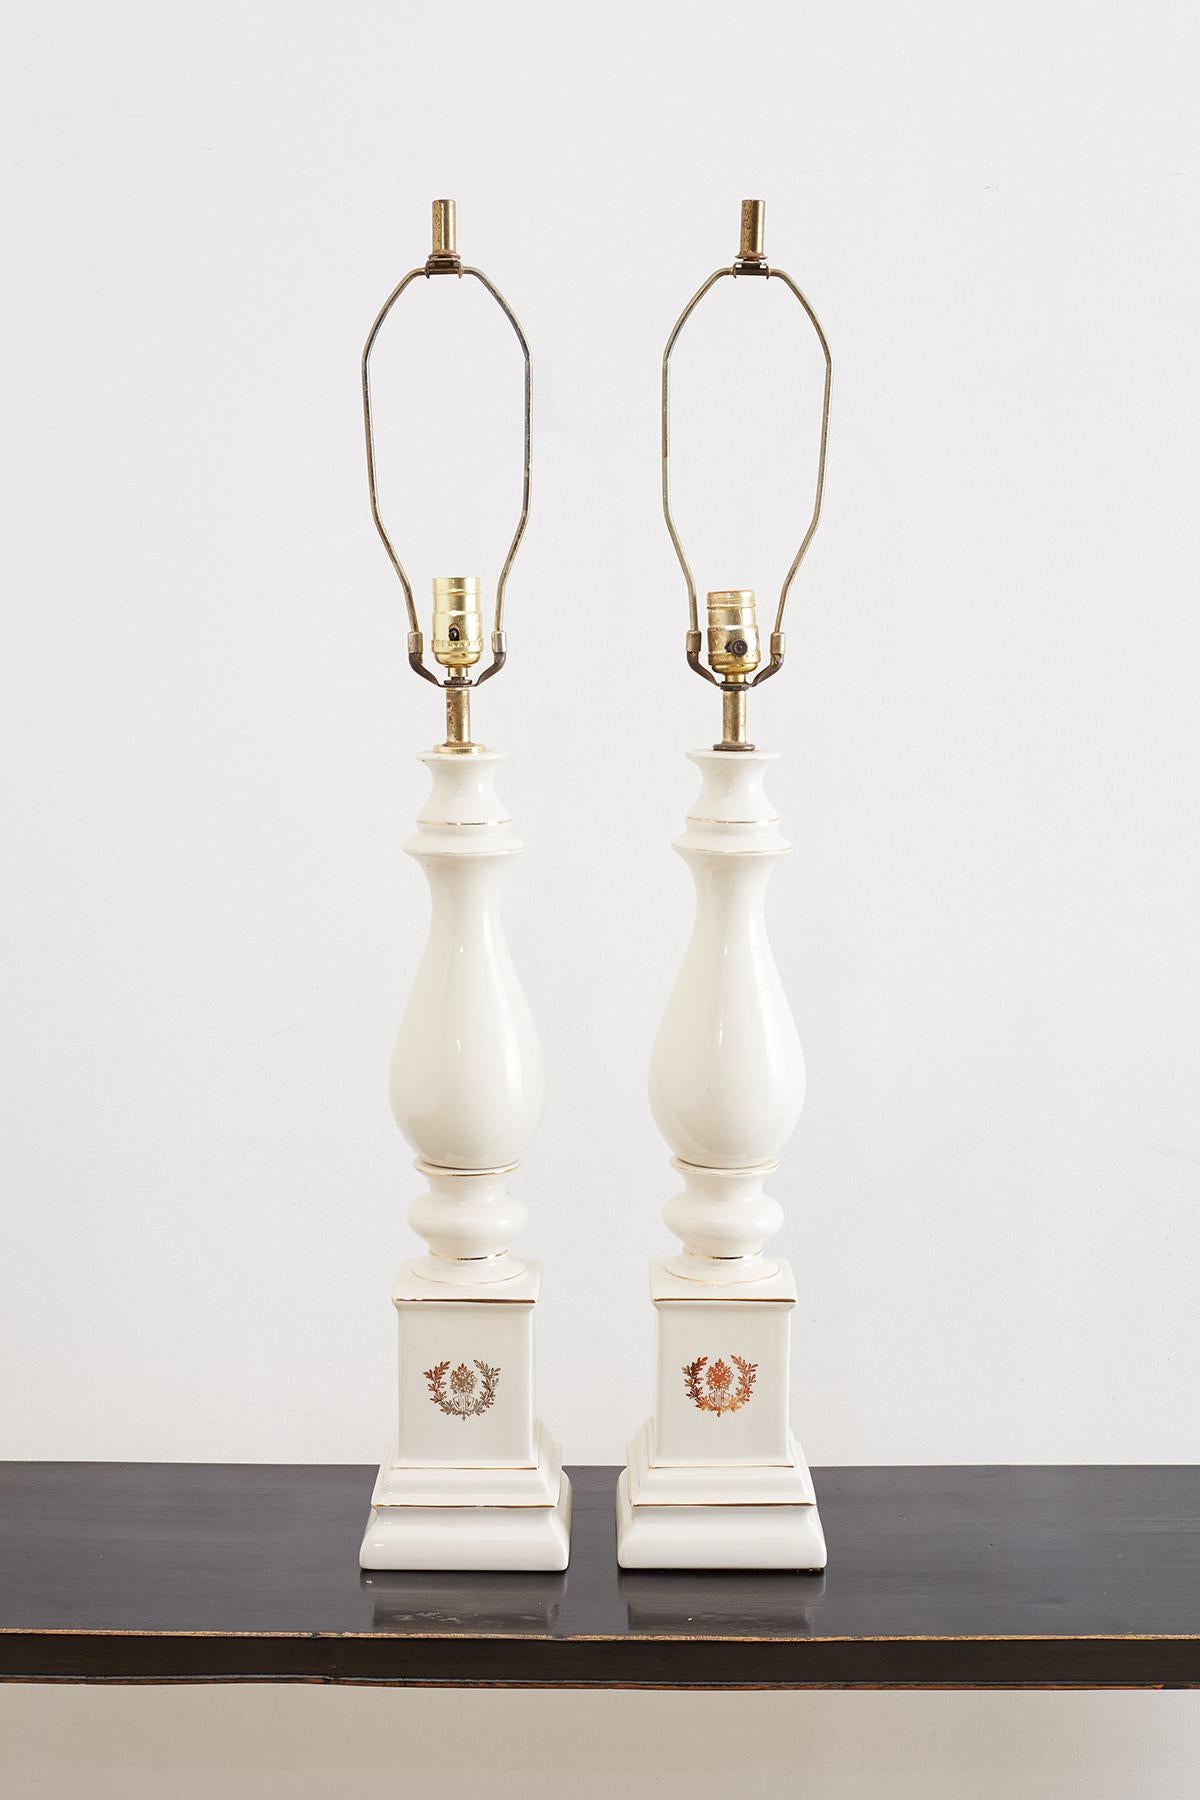 Gorgeous pair of white porcelain table lamps having a baluster form mounted on square pedestals. Made in the neoclassical taste with a parcel gilt finish featuring a laurel wreath crest on the fronts. Topped with original brass hardware, harps, and